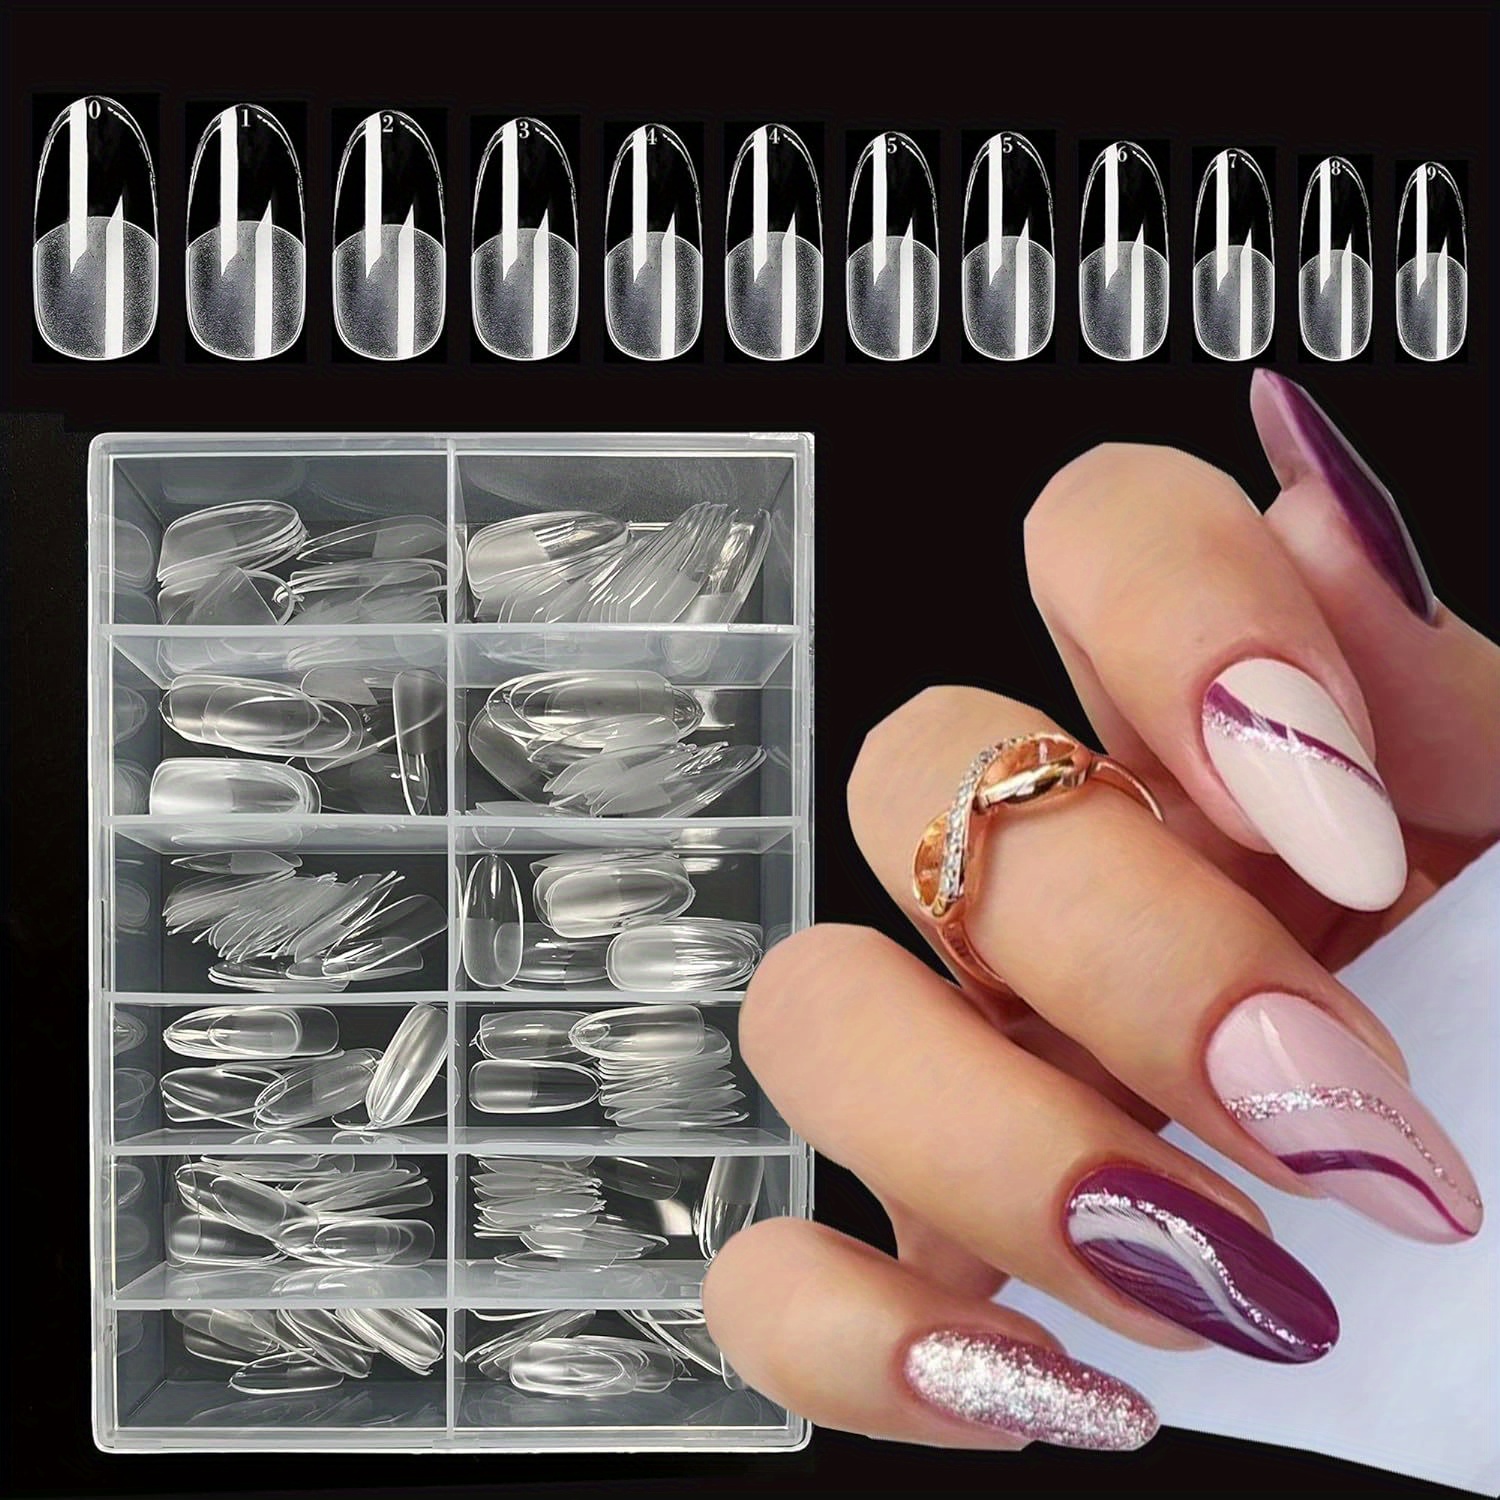 

Clear Medium Oval Nail Tips, Full Cover Acrylic Soft Gel Fake Nails, X Nail Tips Set For Salon & Home Nail Art Manicure